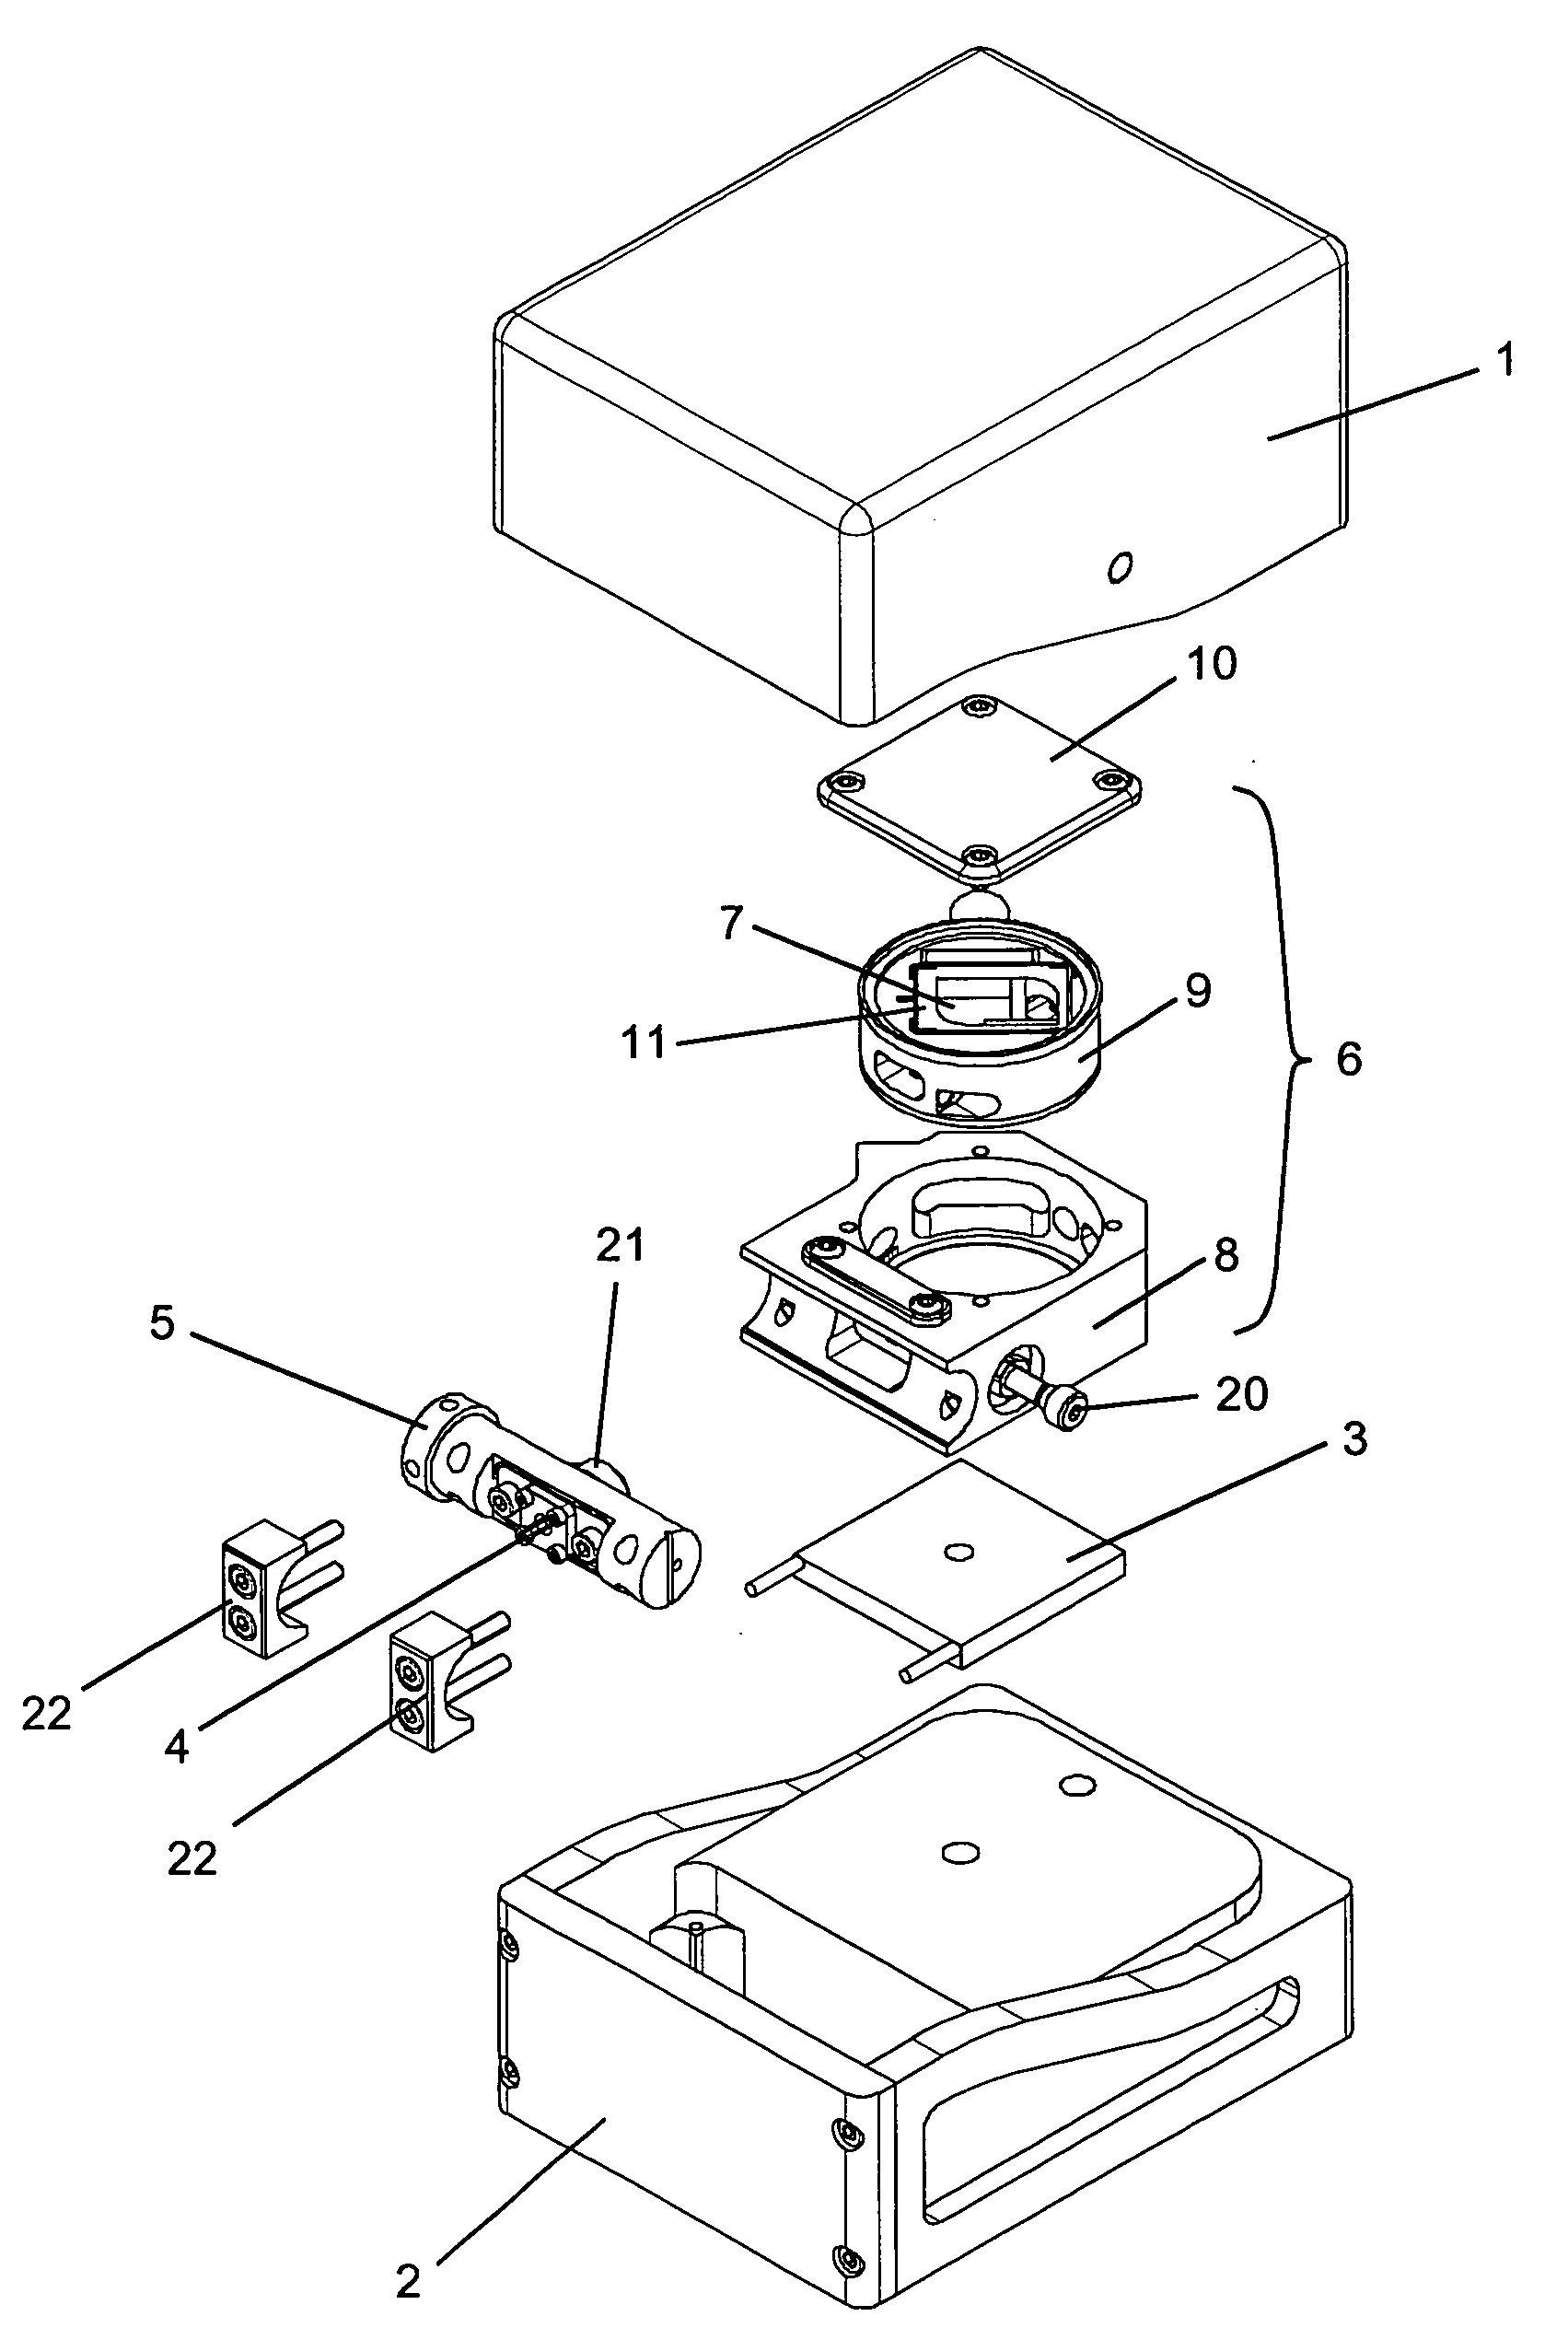 Tunable diode laser system with external resonator